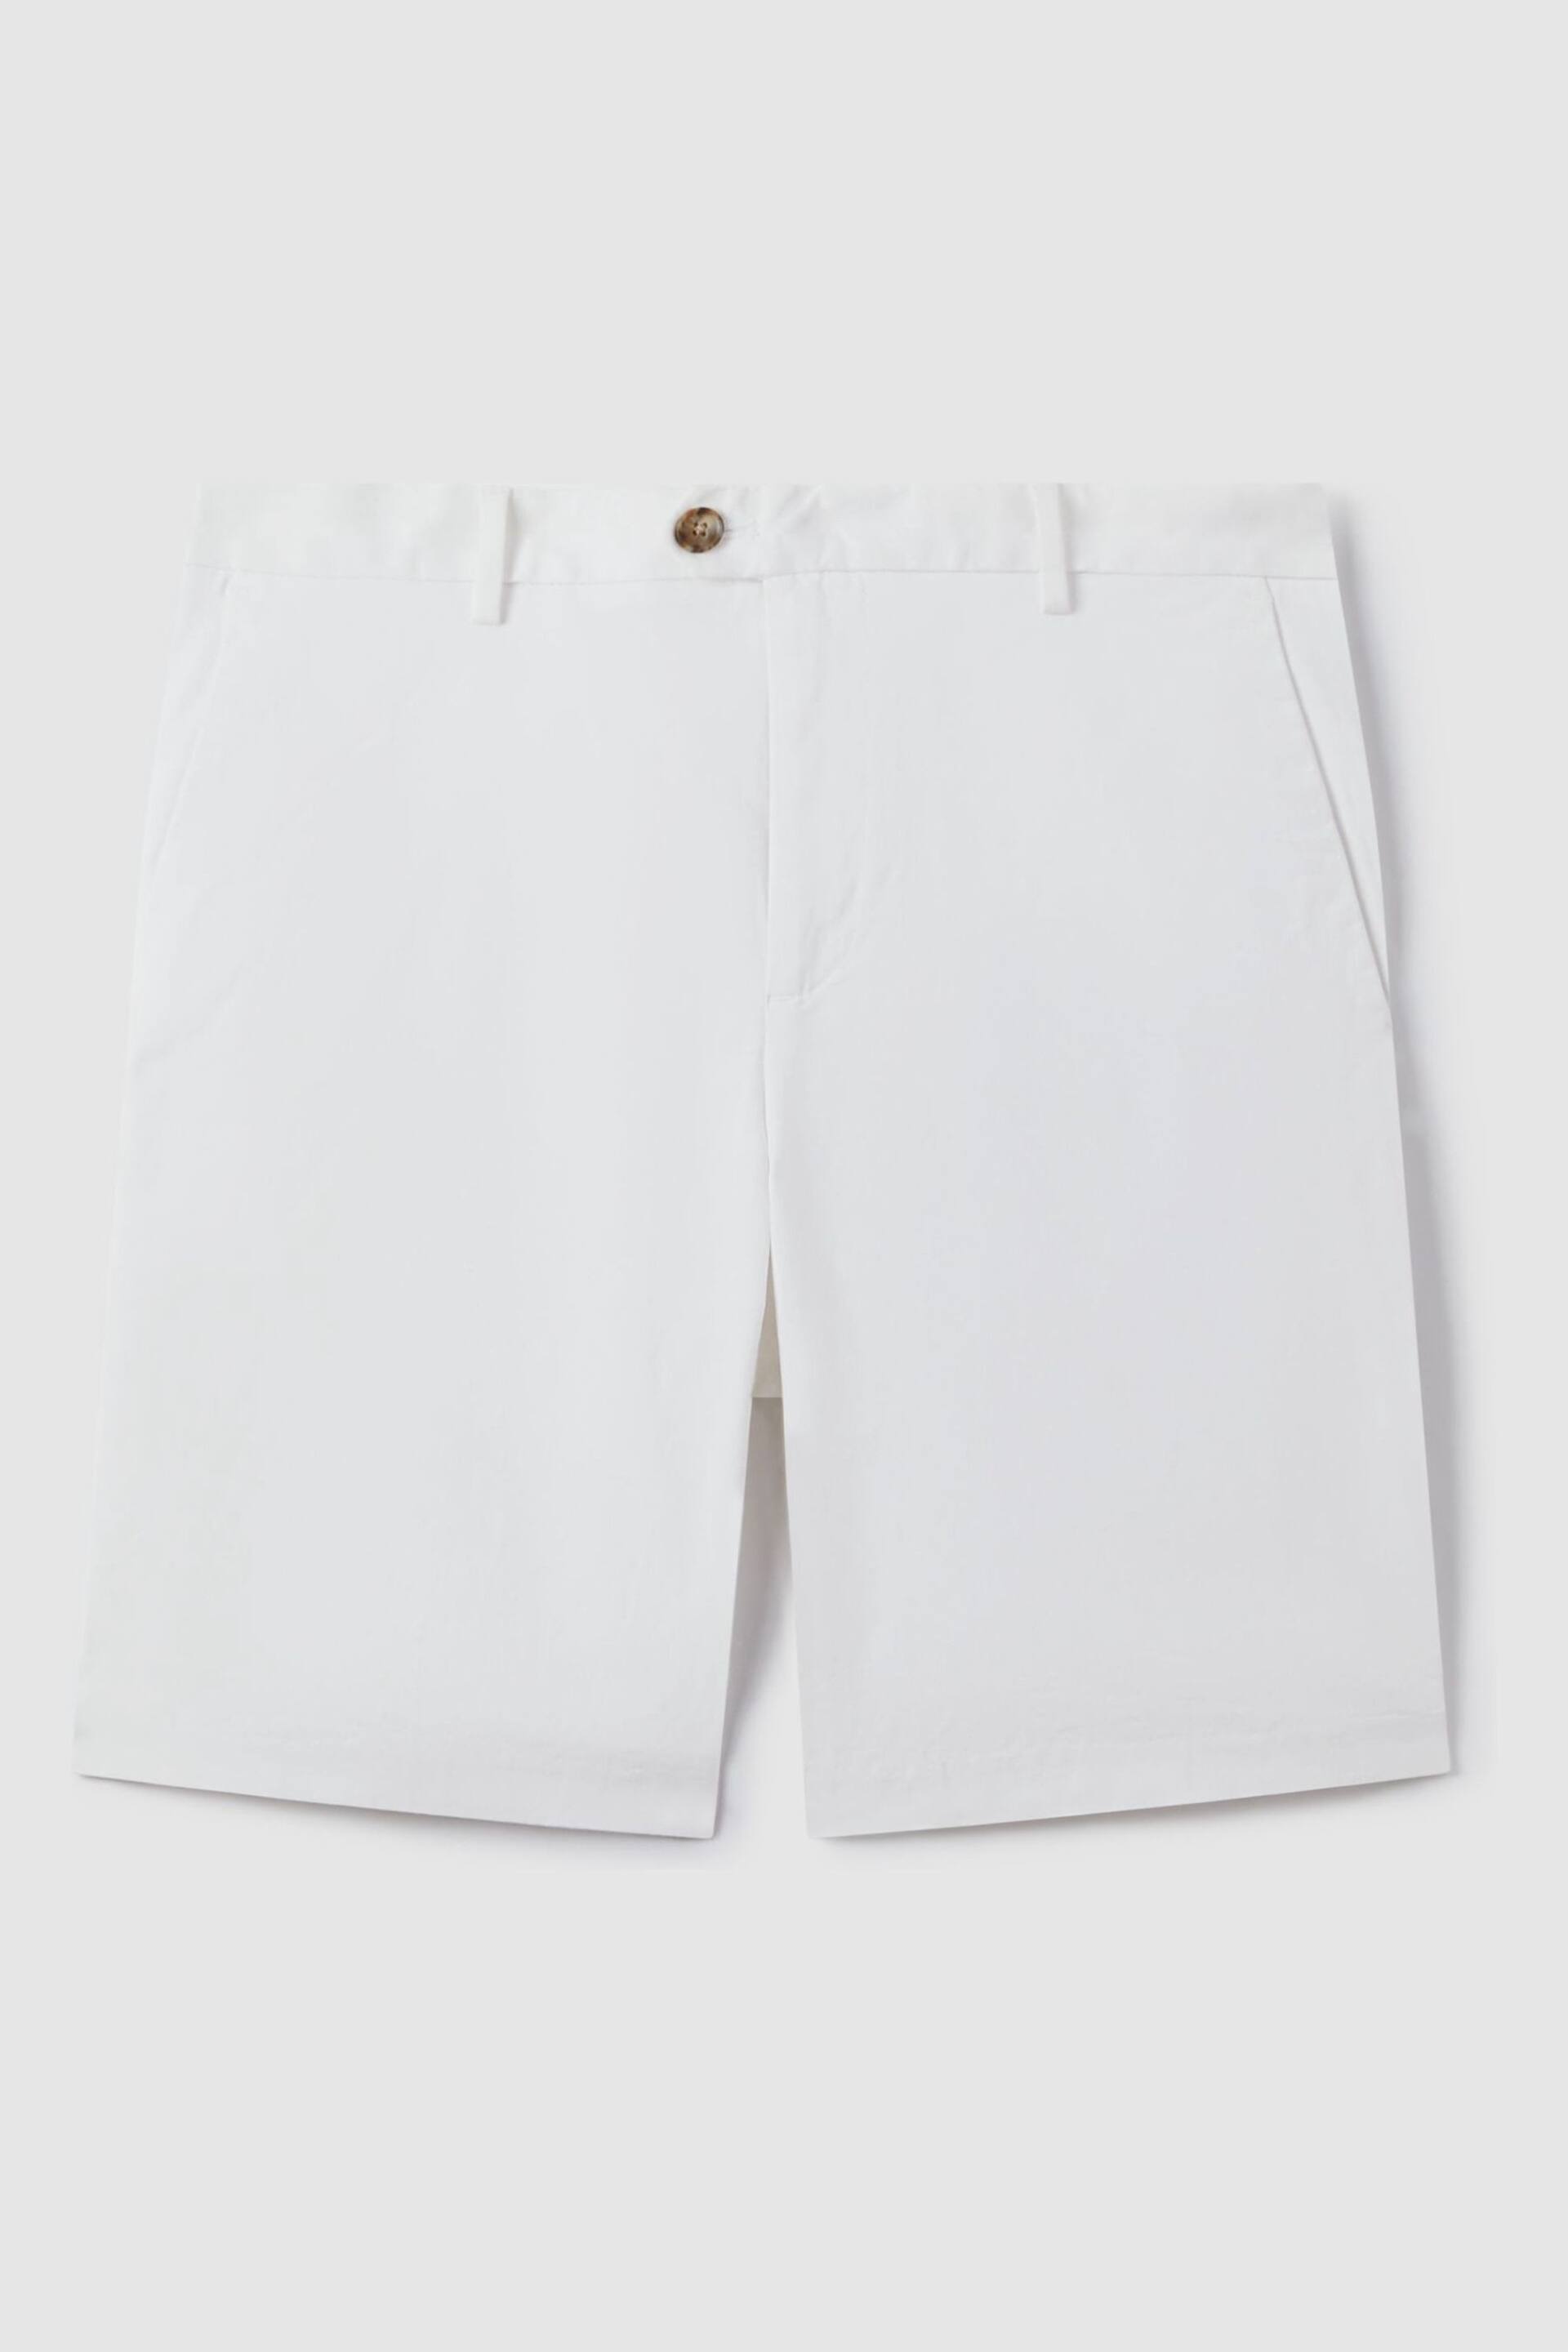 Reiss White Wicket Modern Fit Cotton Blend Chino Shorts - Image 2 of 6